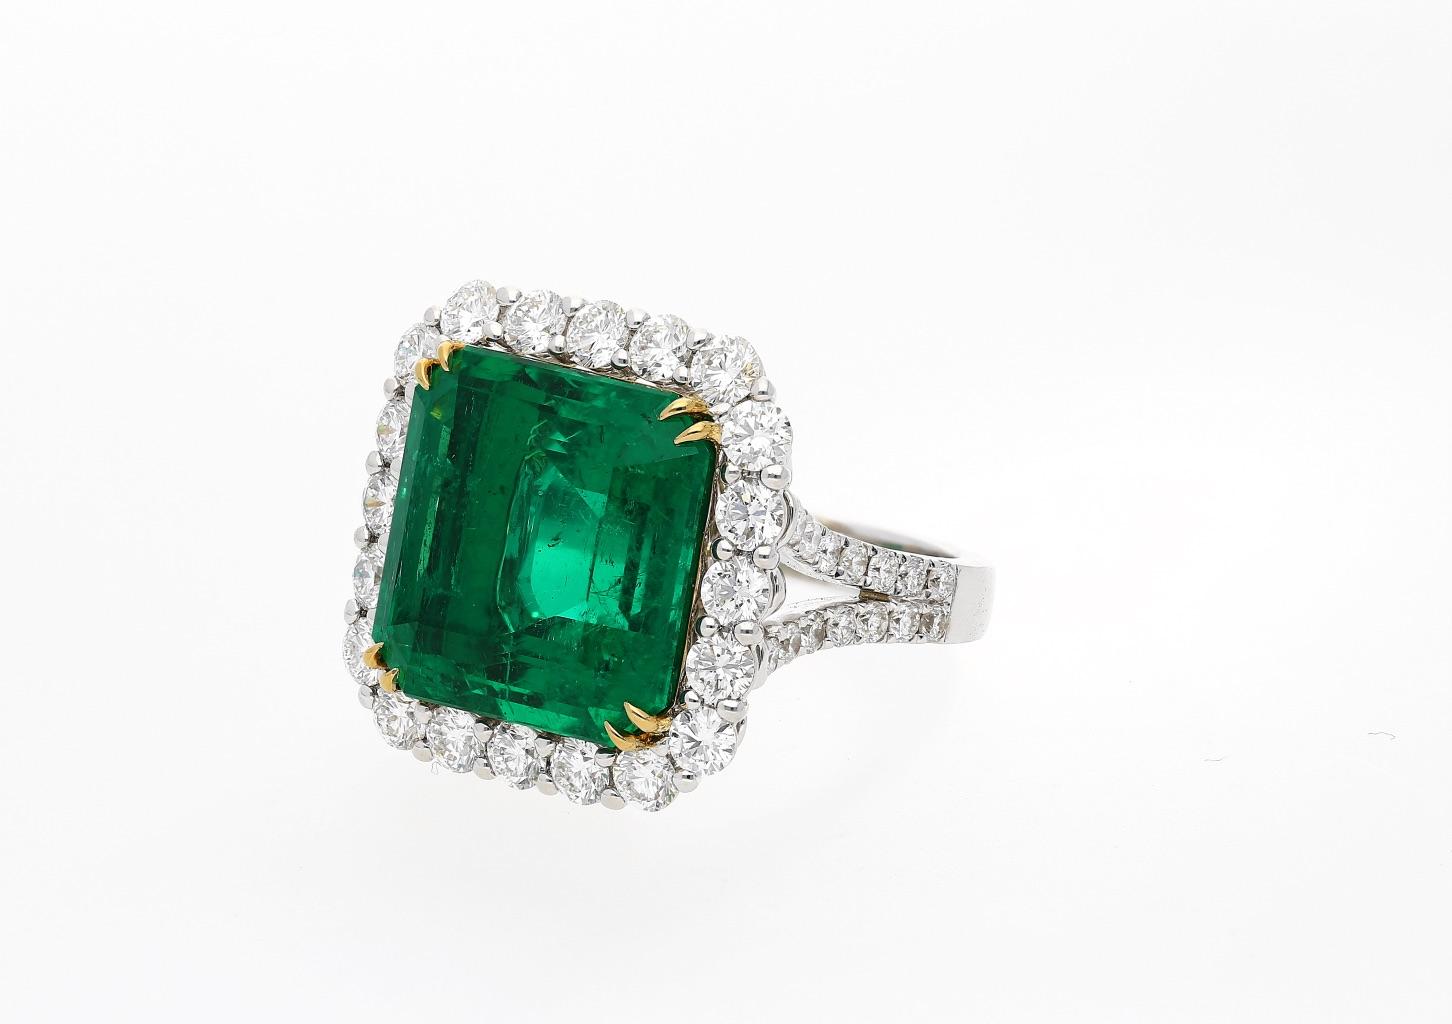 Emerald Cut AGL Certified 16.46 Carat Vivid Green Colombian Emerald and Diamond Halo Ring For Sale